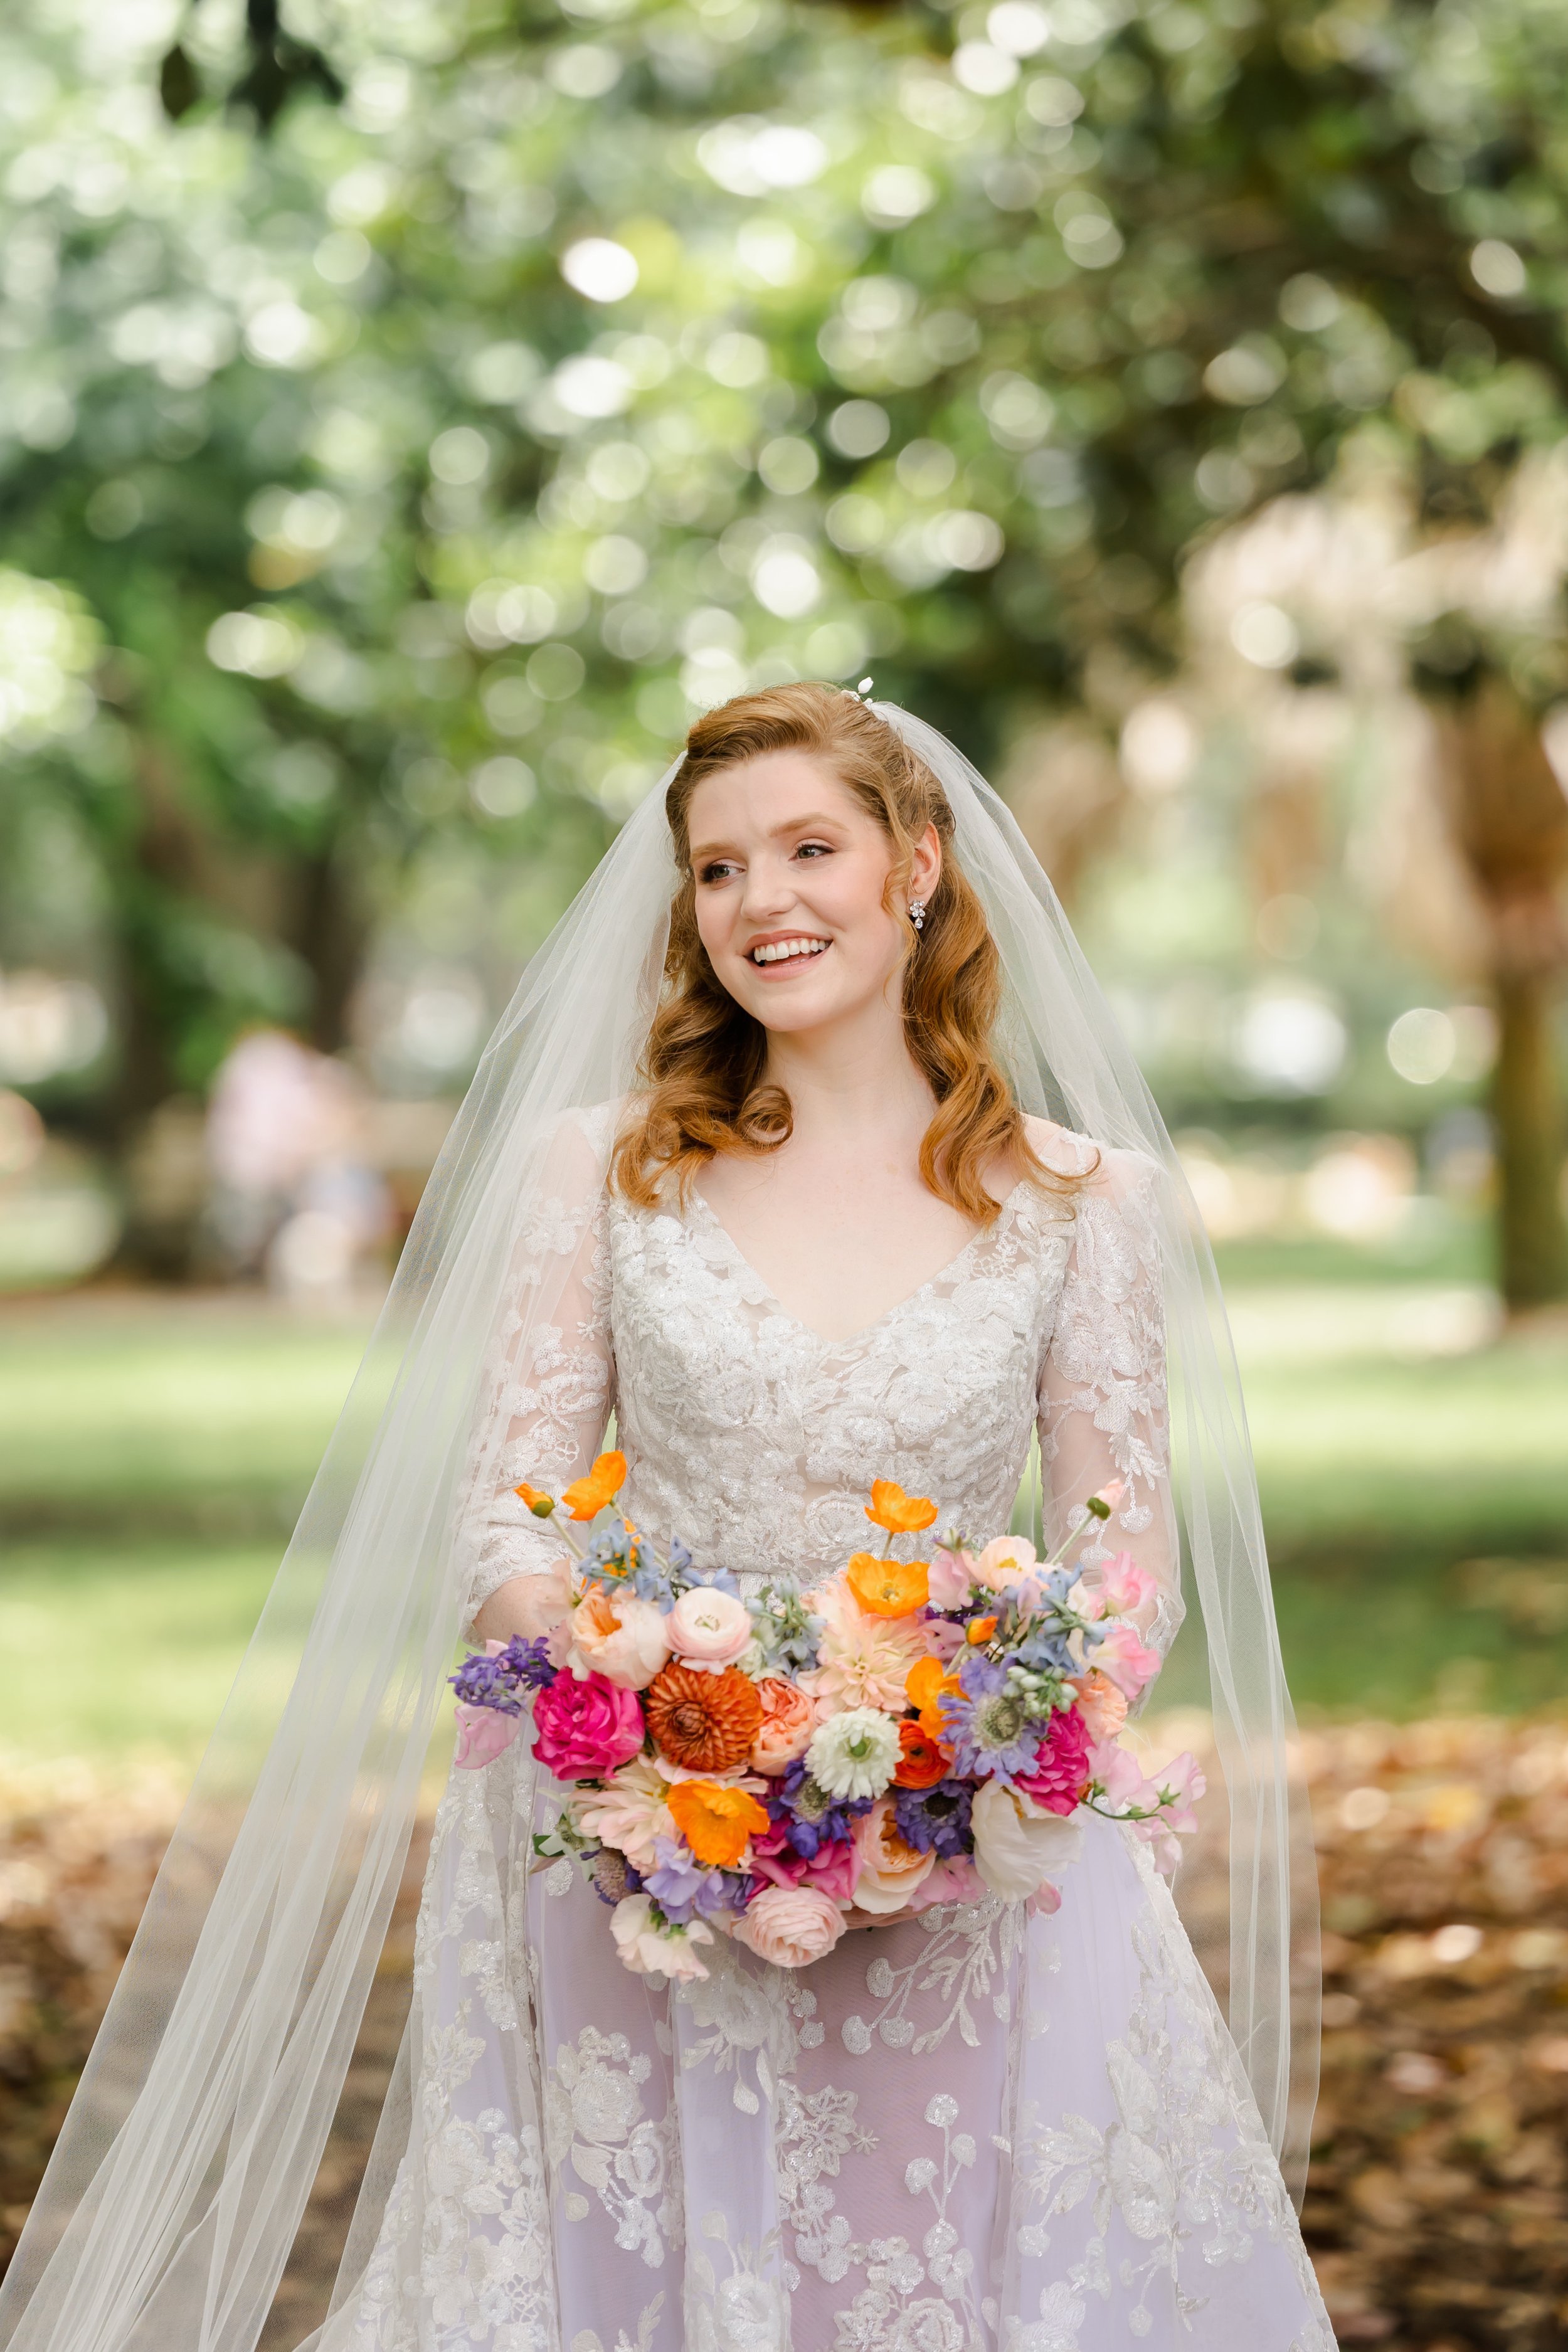 sam-and-coys-bright-and-colorful-garden-wedding-at-ships-of-the-sea-in-savannah-georgia-with-colorful-wedding-florals-desinged-by-savannah-florist-ivory-and-beau-savannah-wedding-savannah-wedding-flowers-savannah-florist-22.jpg